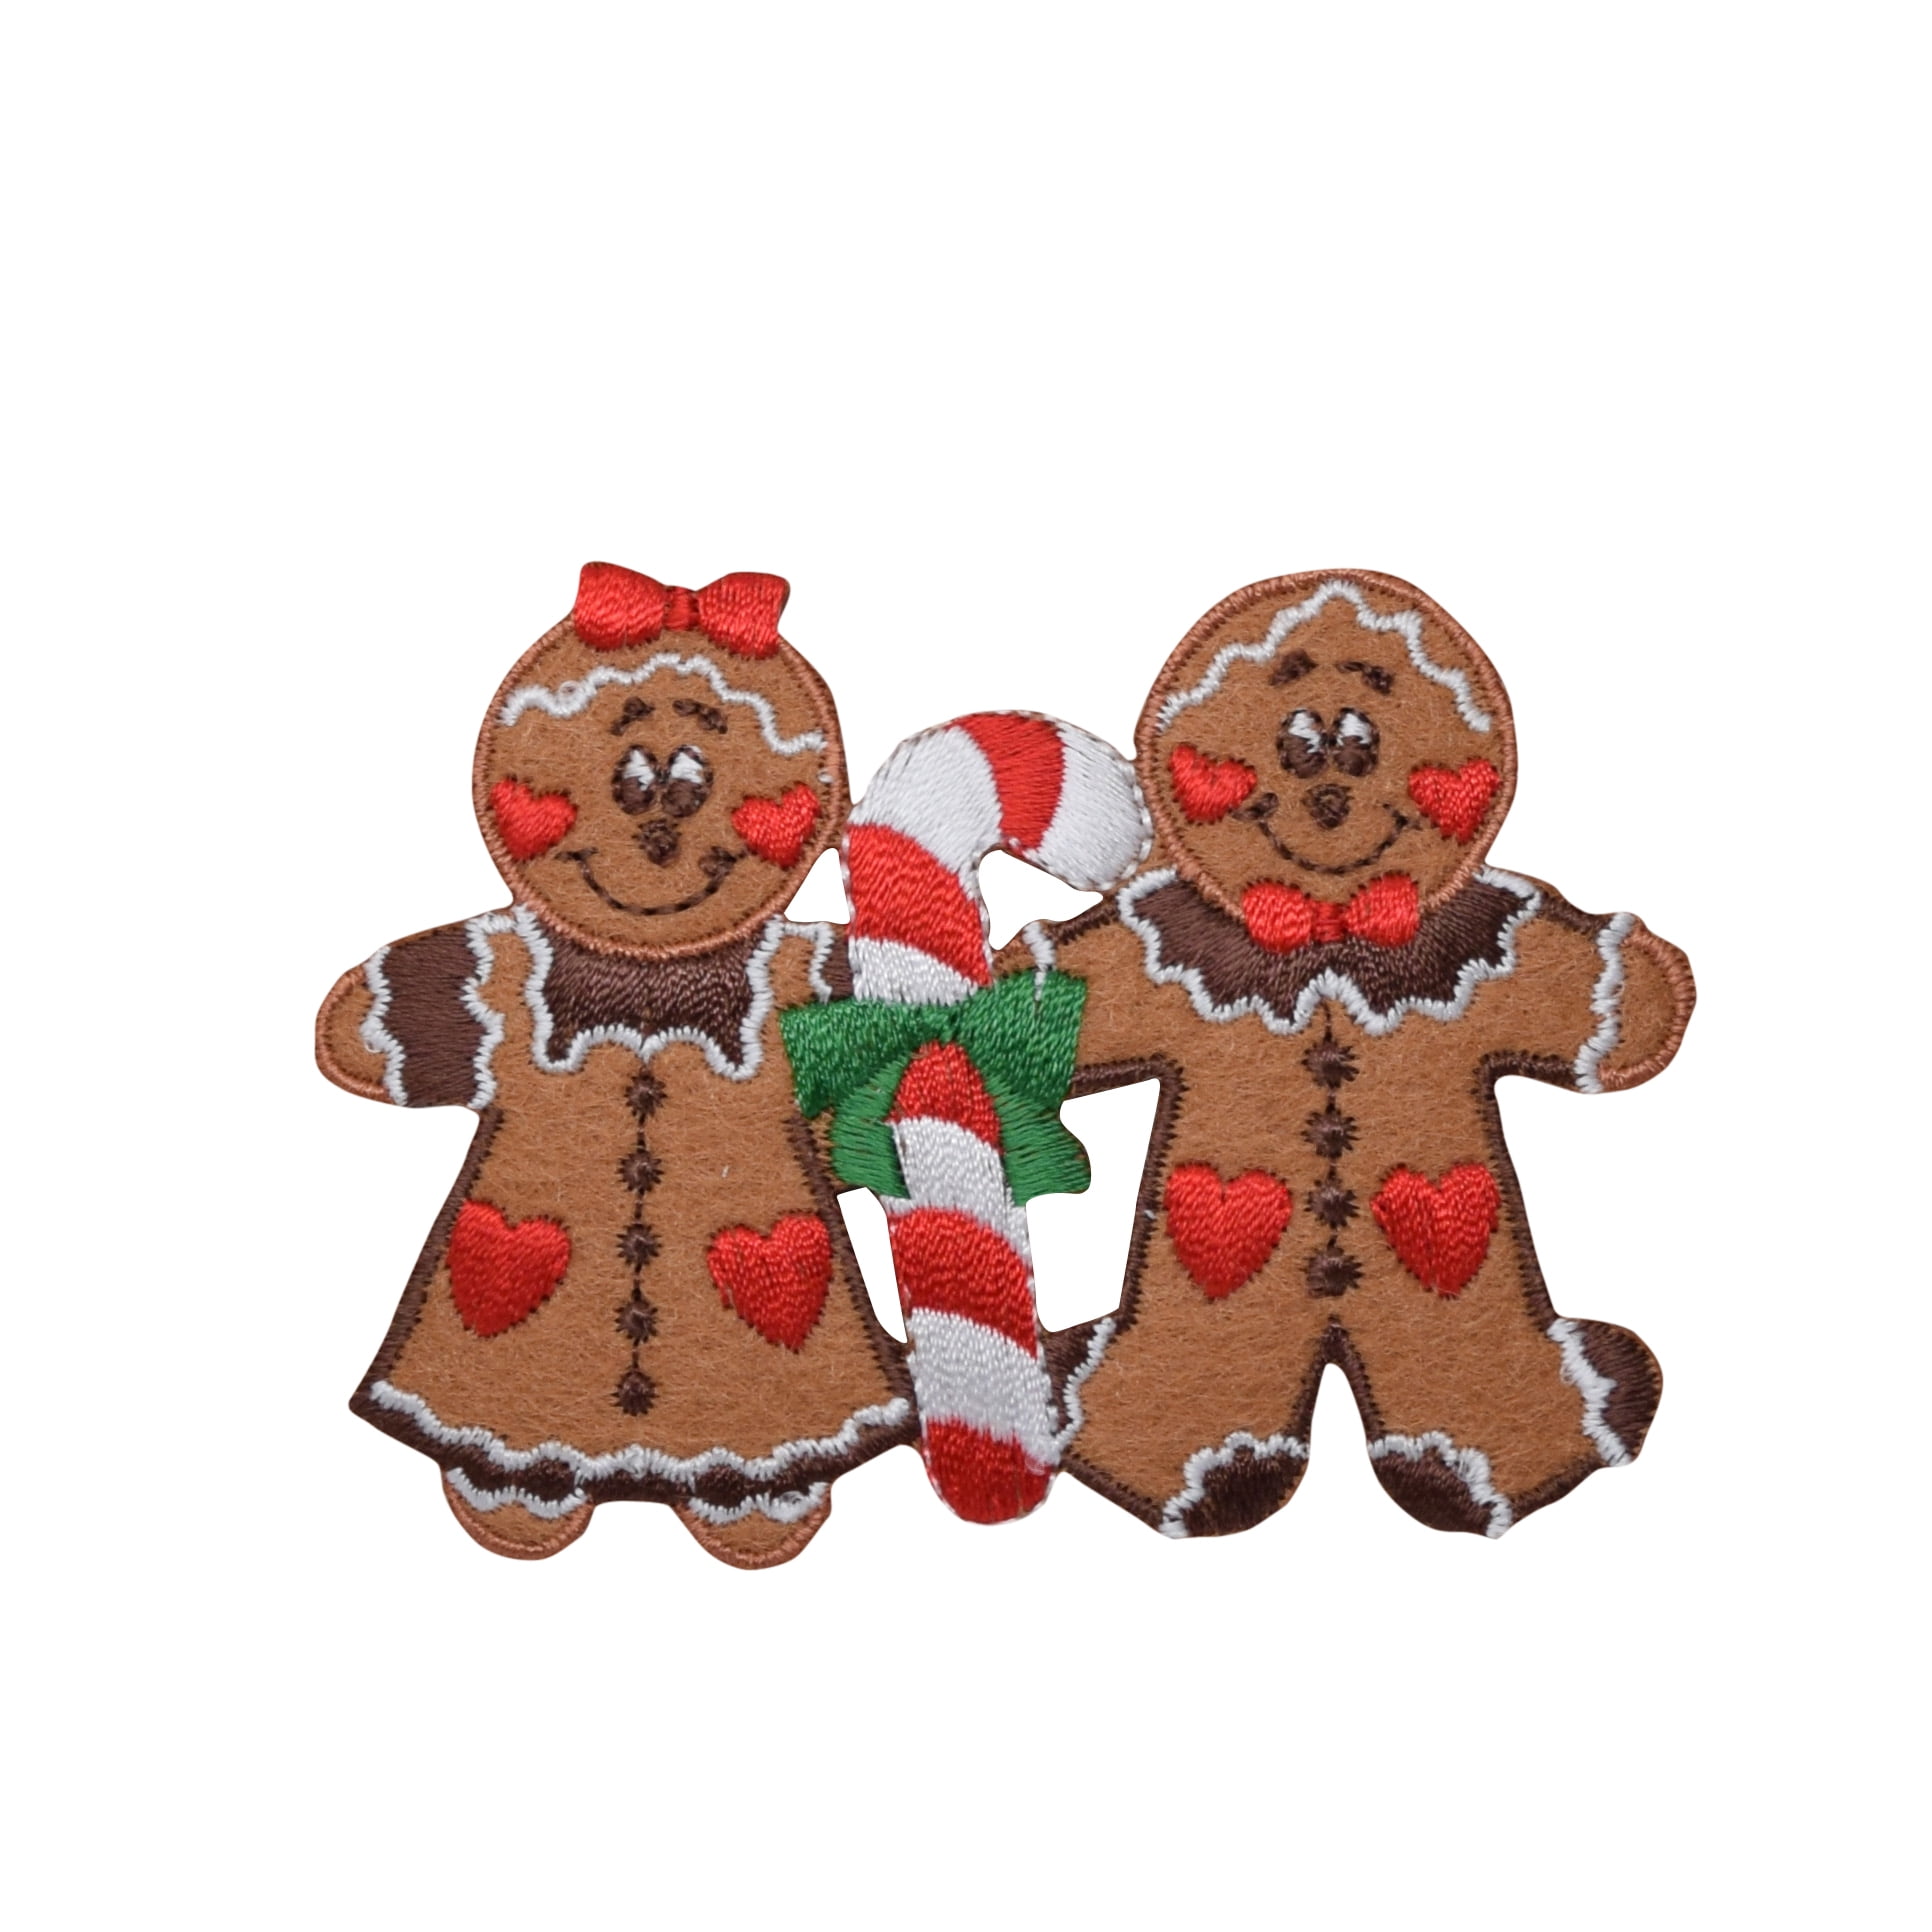 Iron on Applique//Embroidered Patch Christmas Cookie Gingerbread House